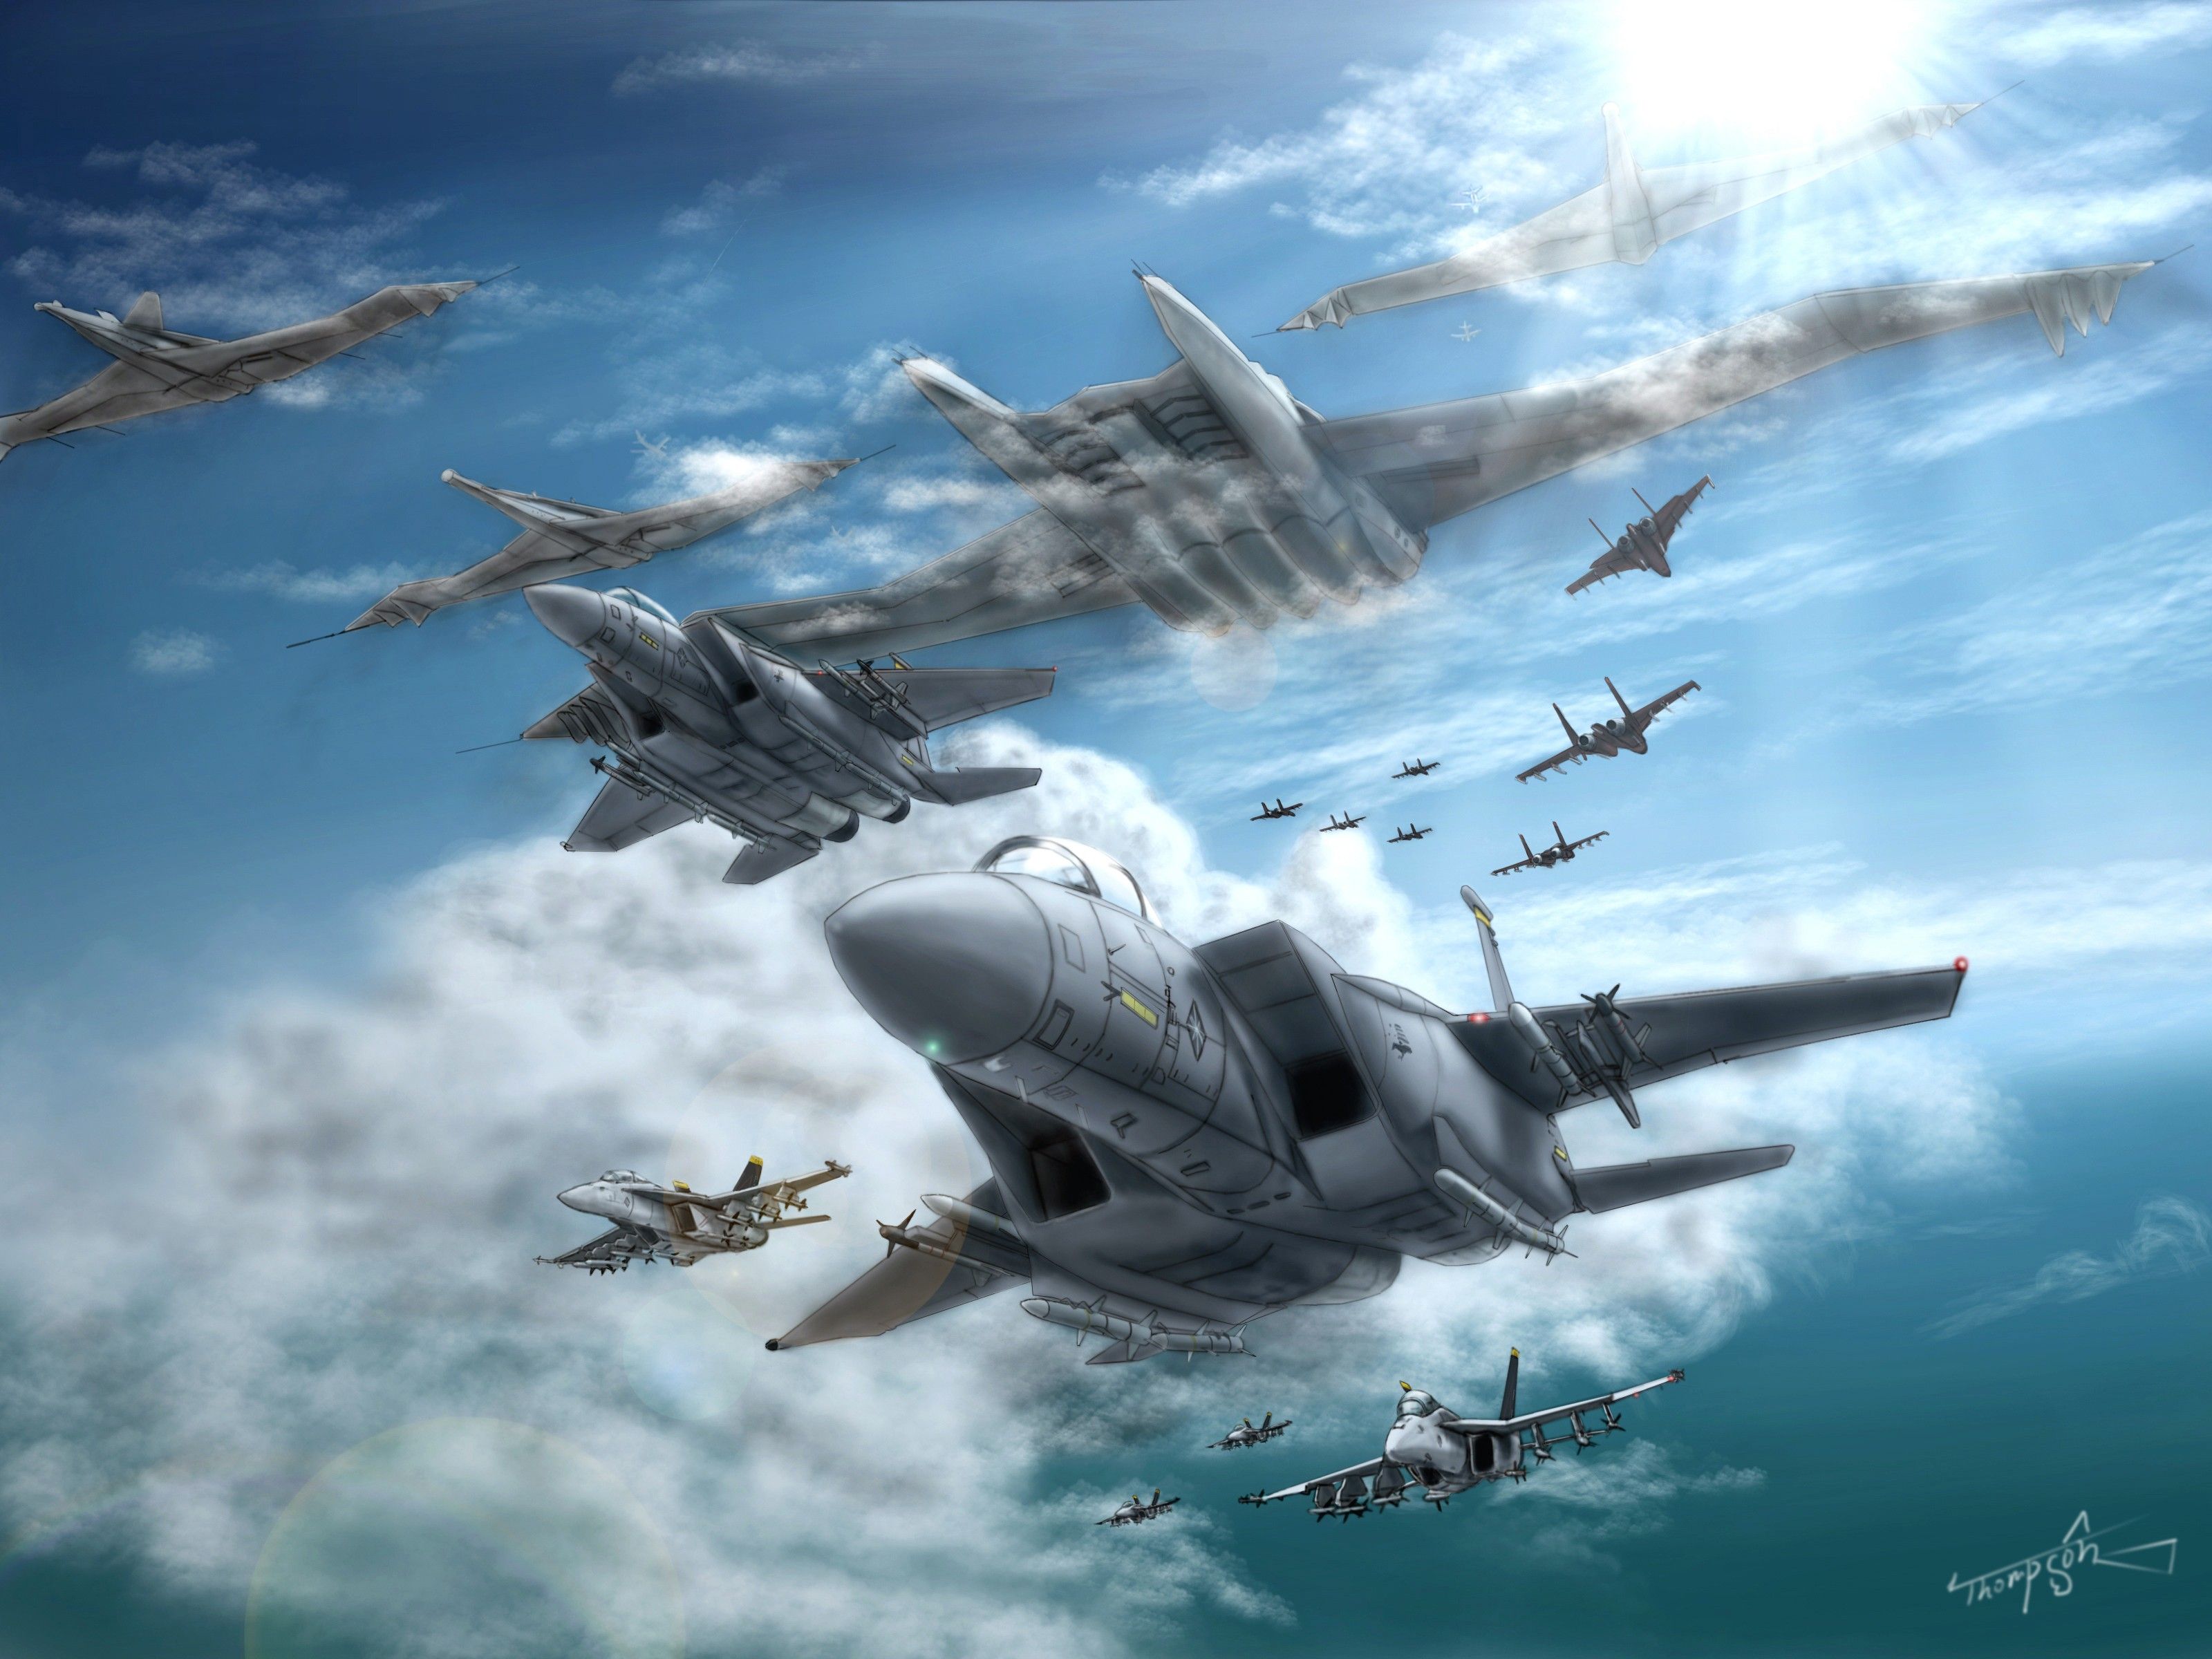 ACE COMBAT game jet airplane aircraft fighter plane military